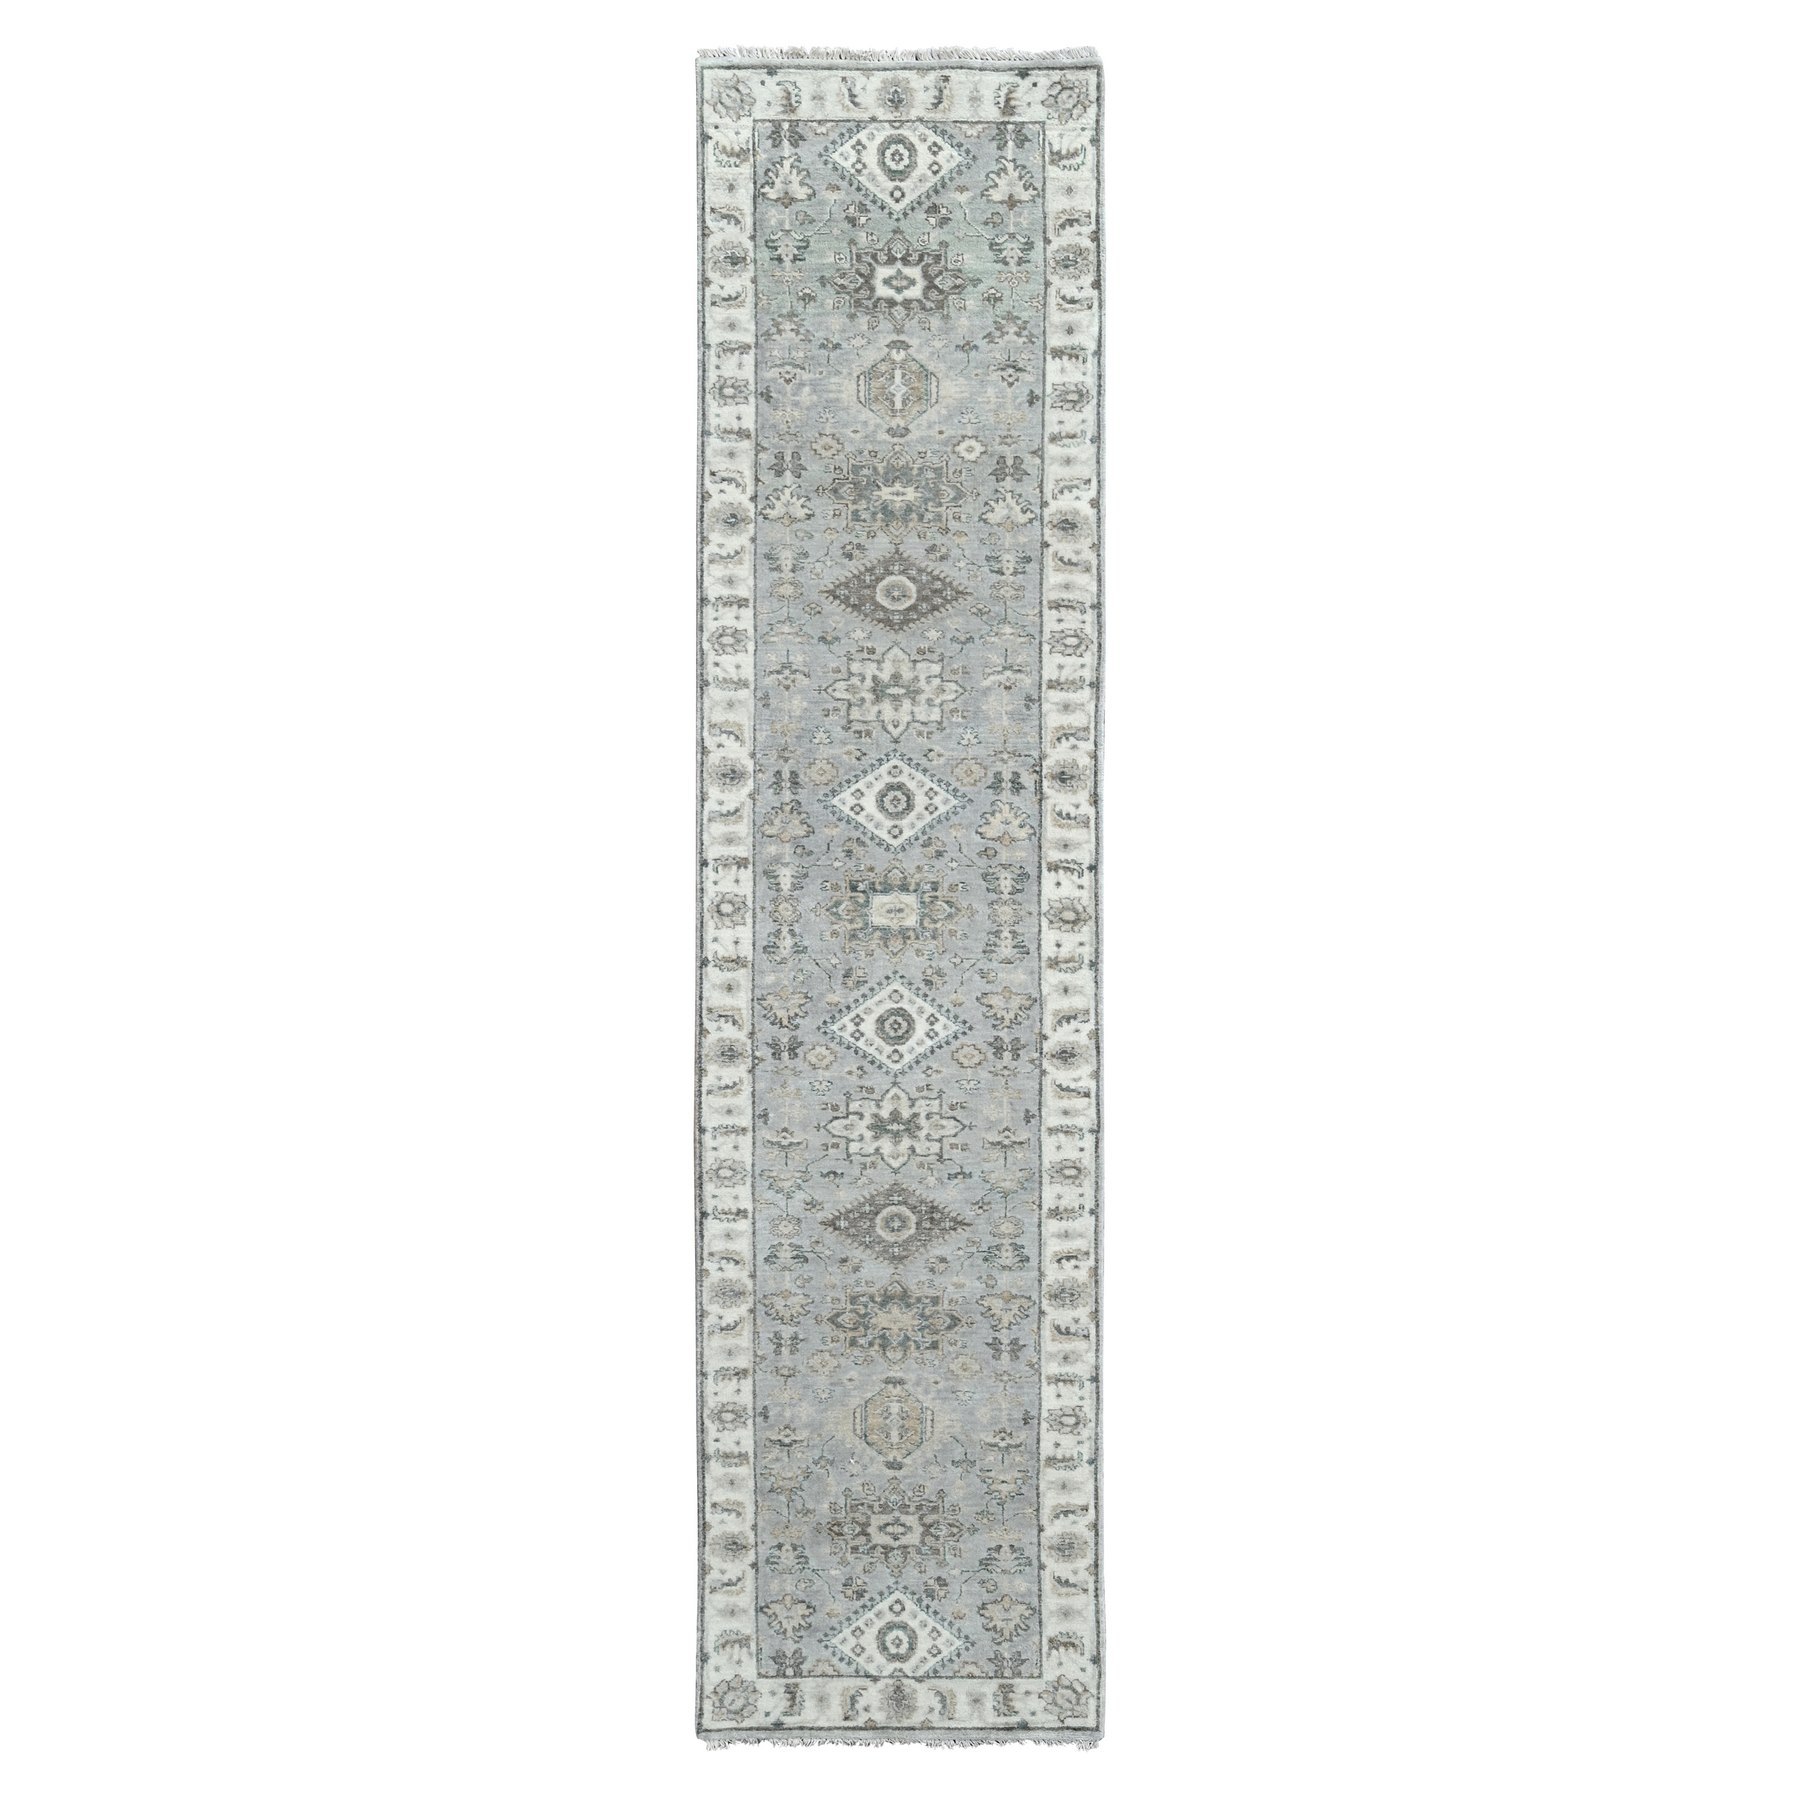 Lazy Gray, Velvety Wool, Hand Knotted Karajeh Design Geometric Motifs, Vegetable Dyes, Soft To The Touch Pile, Oriental Runner Rug